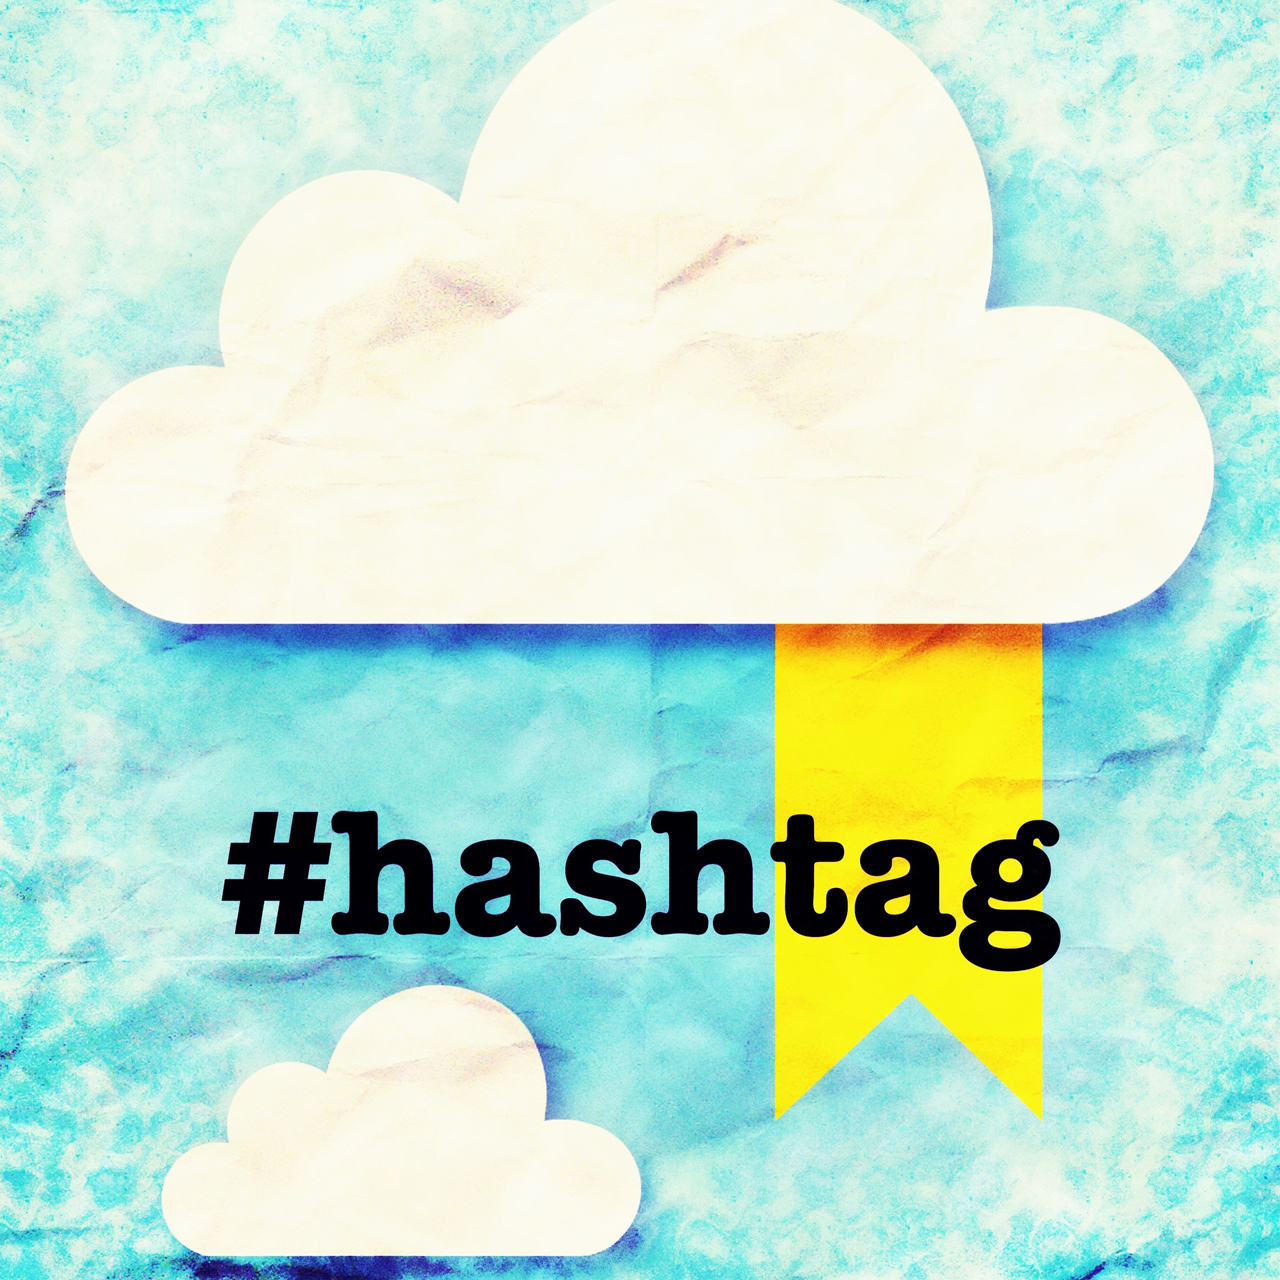 Hashtag: A history and its uses